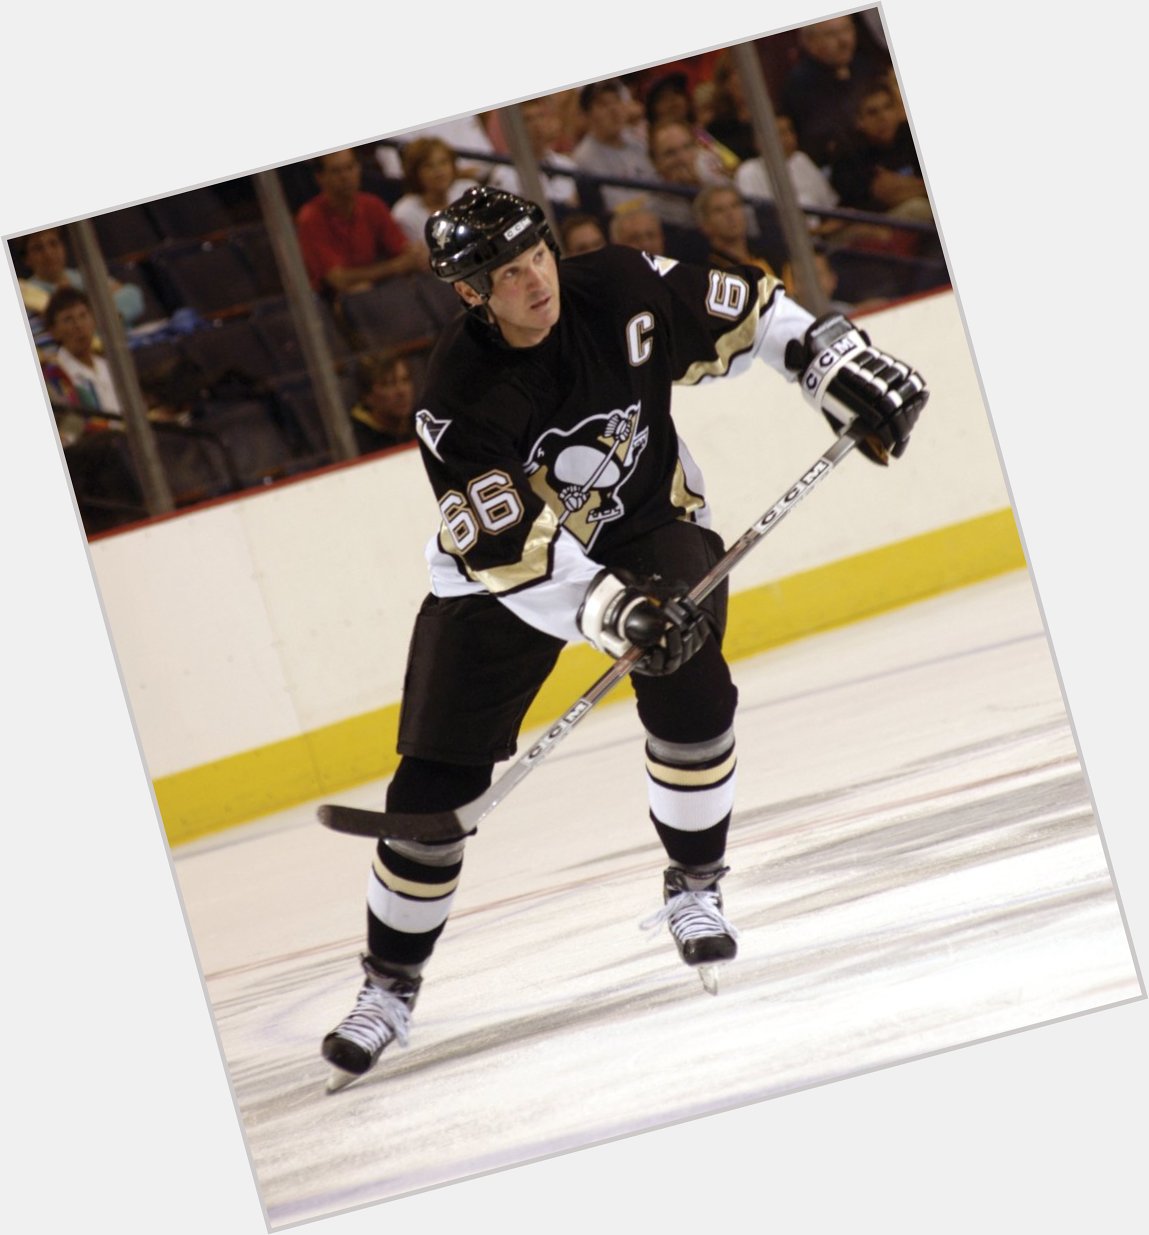 Happy 52nd birthday to Pittsburgh Penguins captain Mario Lemieux. 